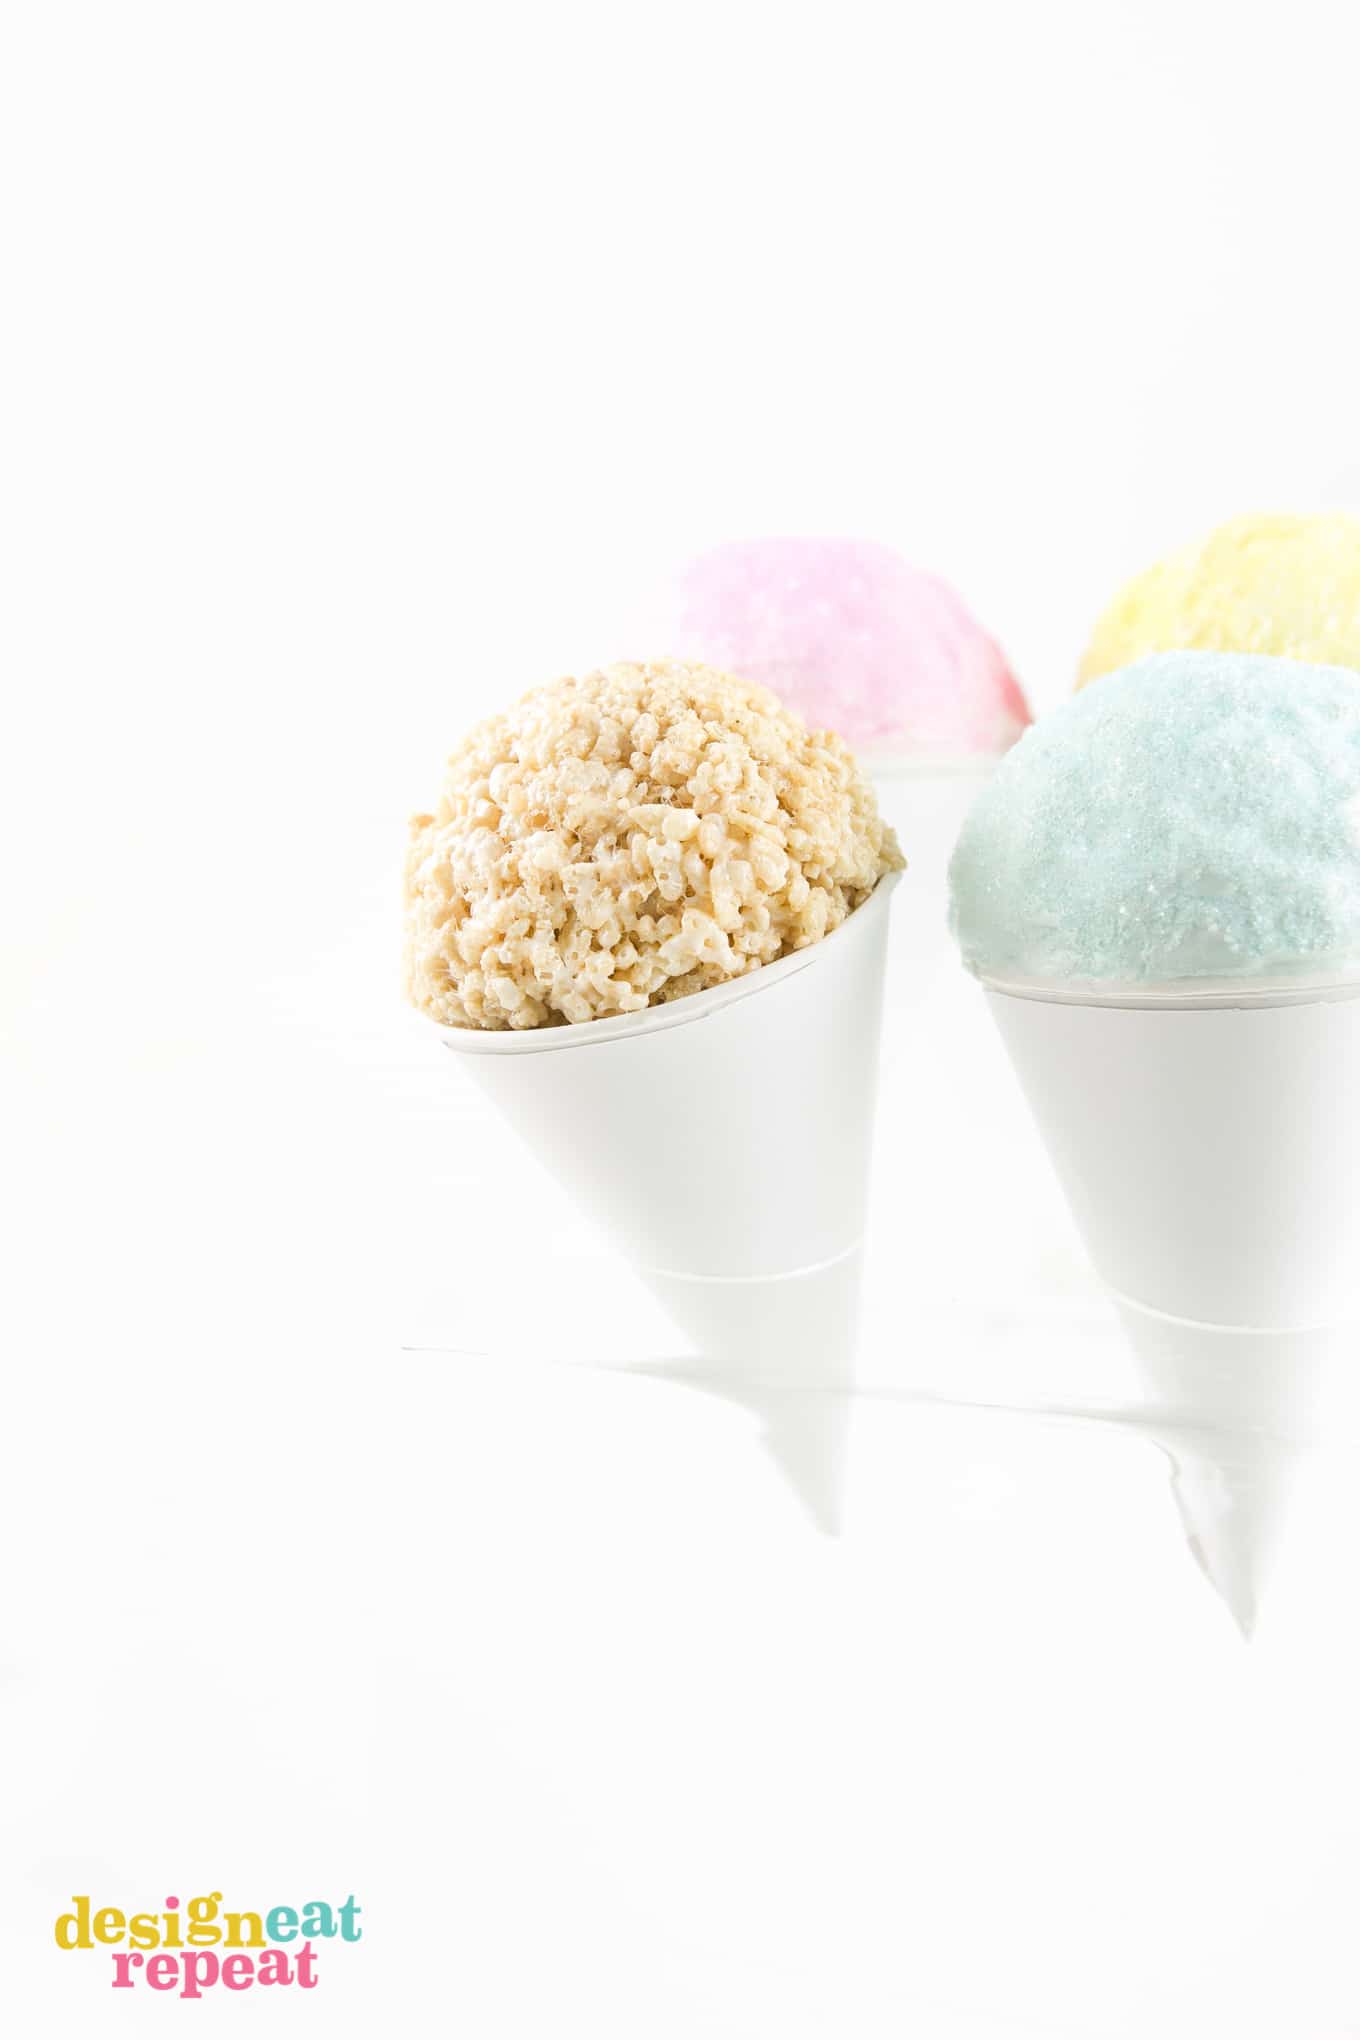 Ball of rice krispie cereal in paper snow cone with colored sugar.